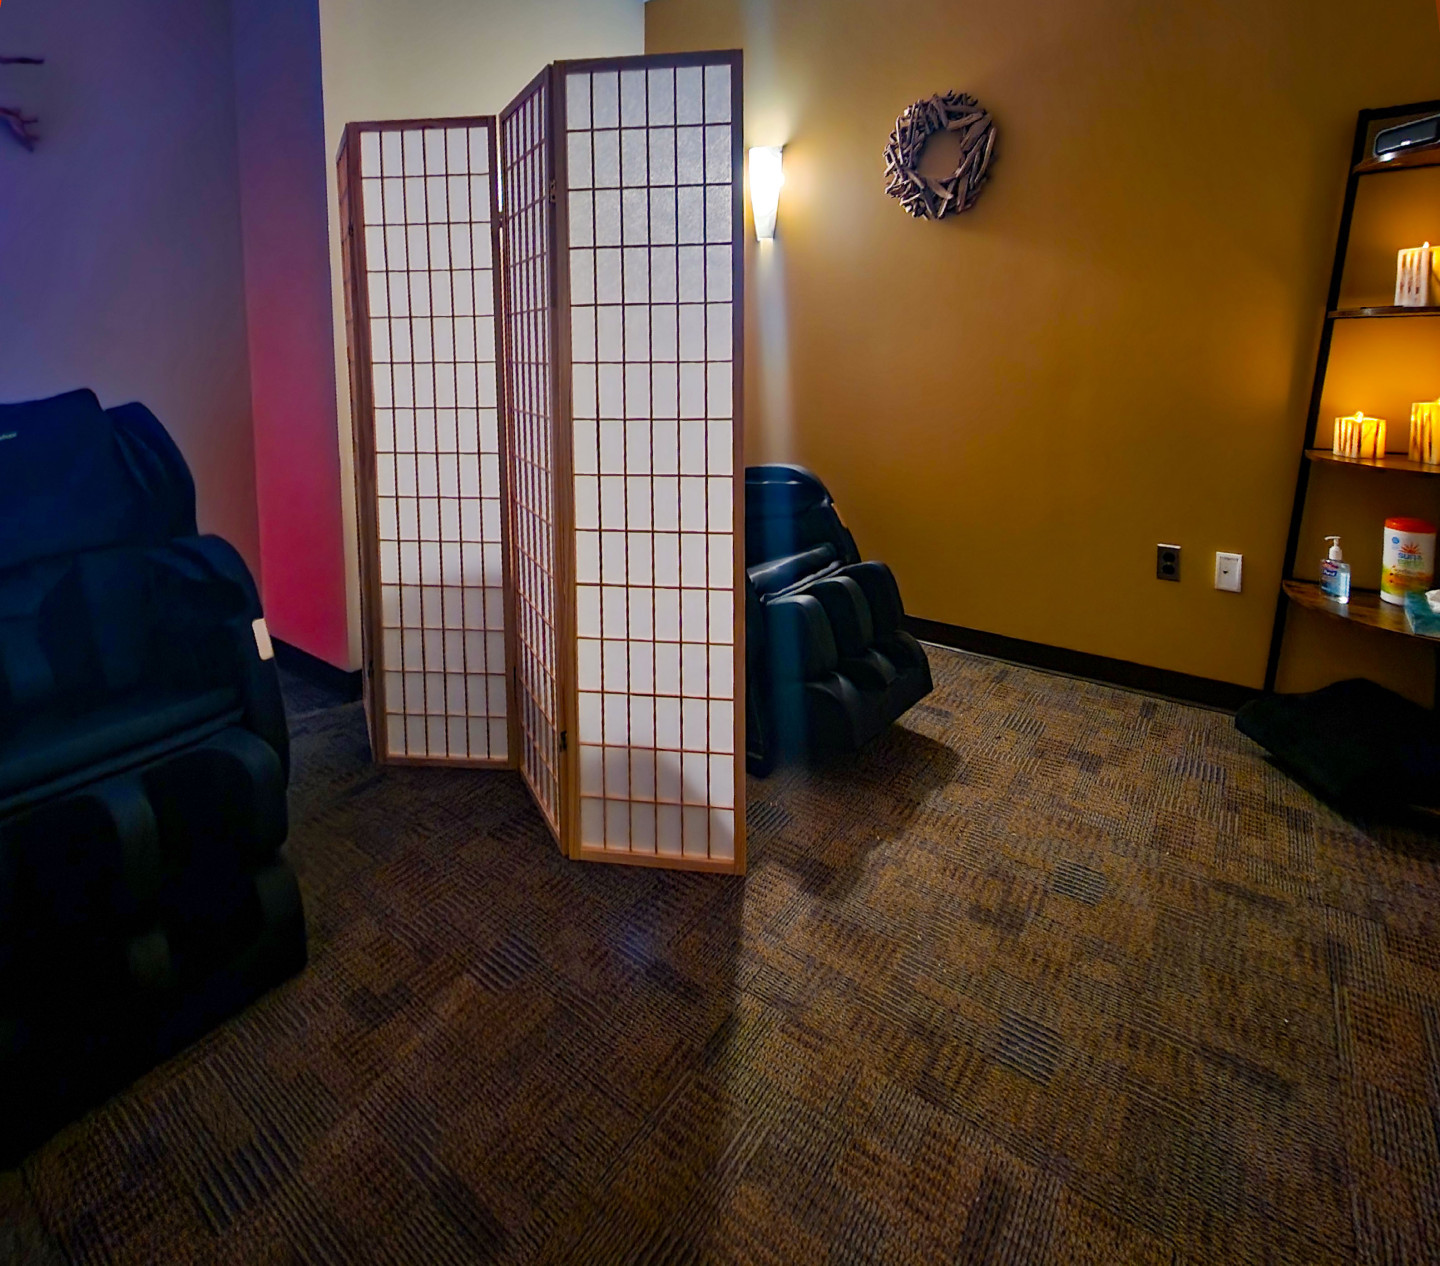 View of room with two massage chairs and artificial candles.